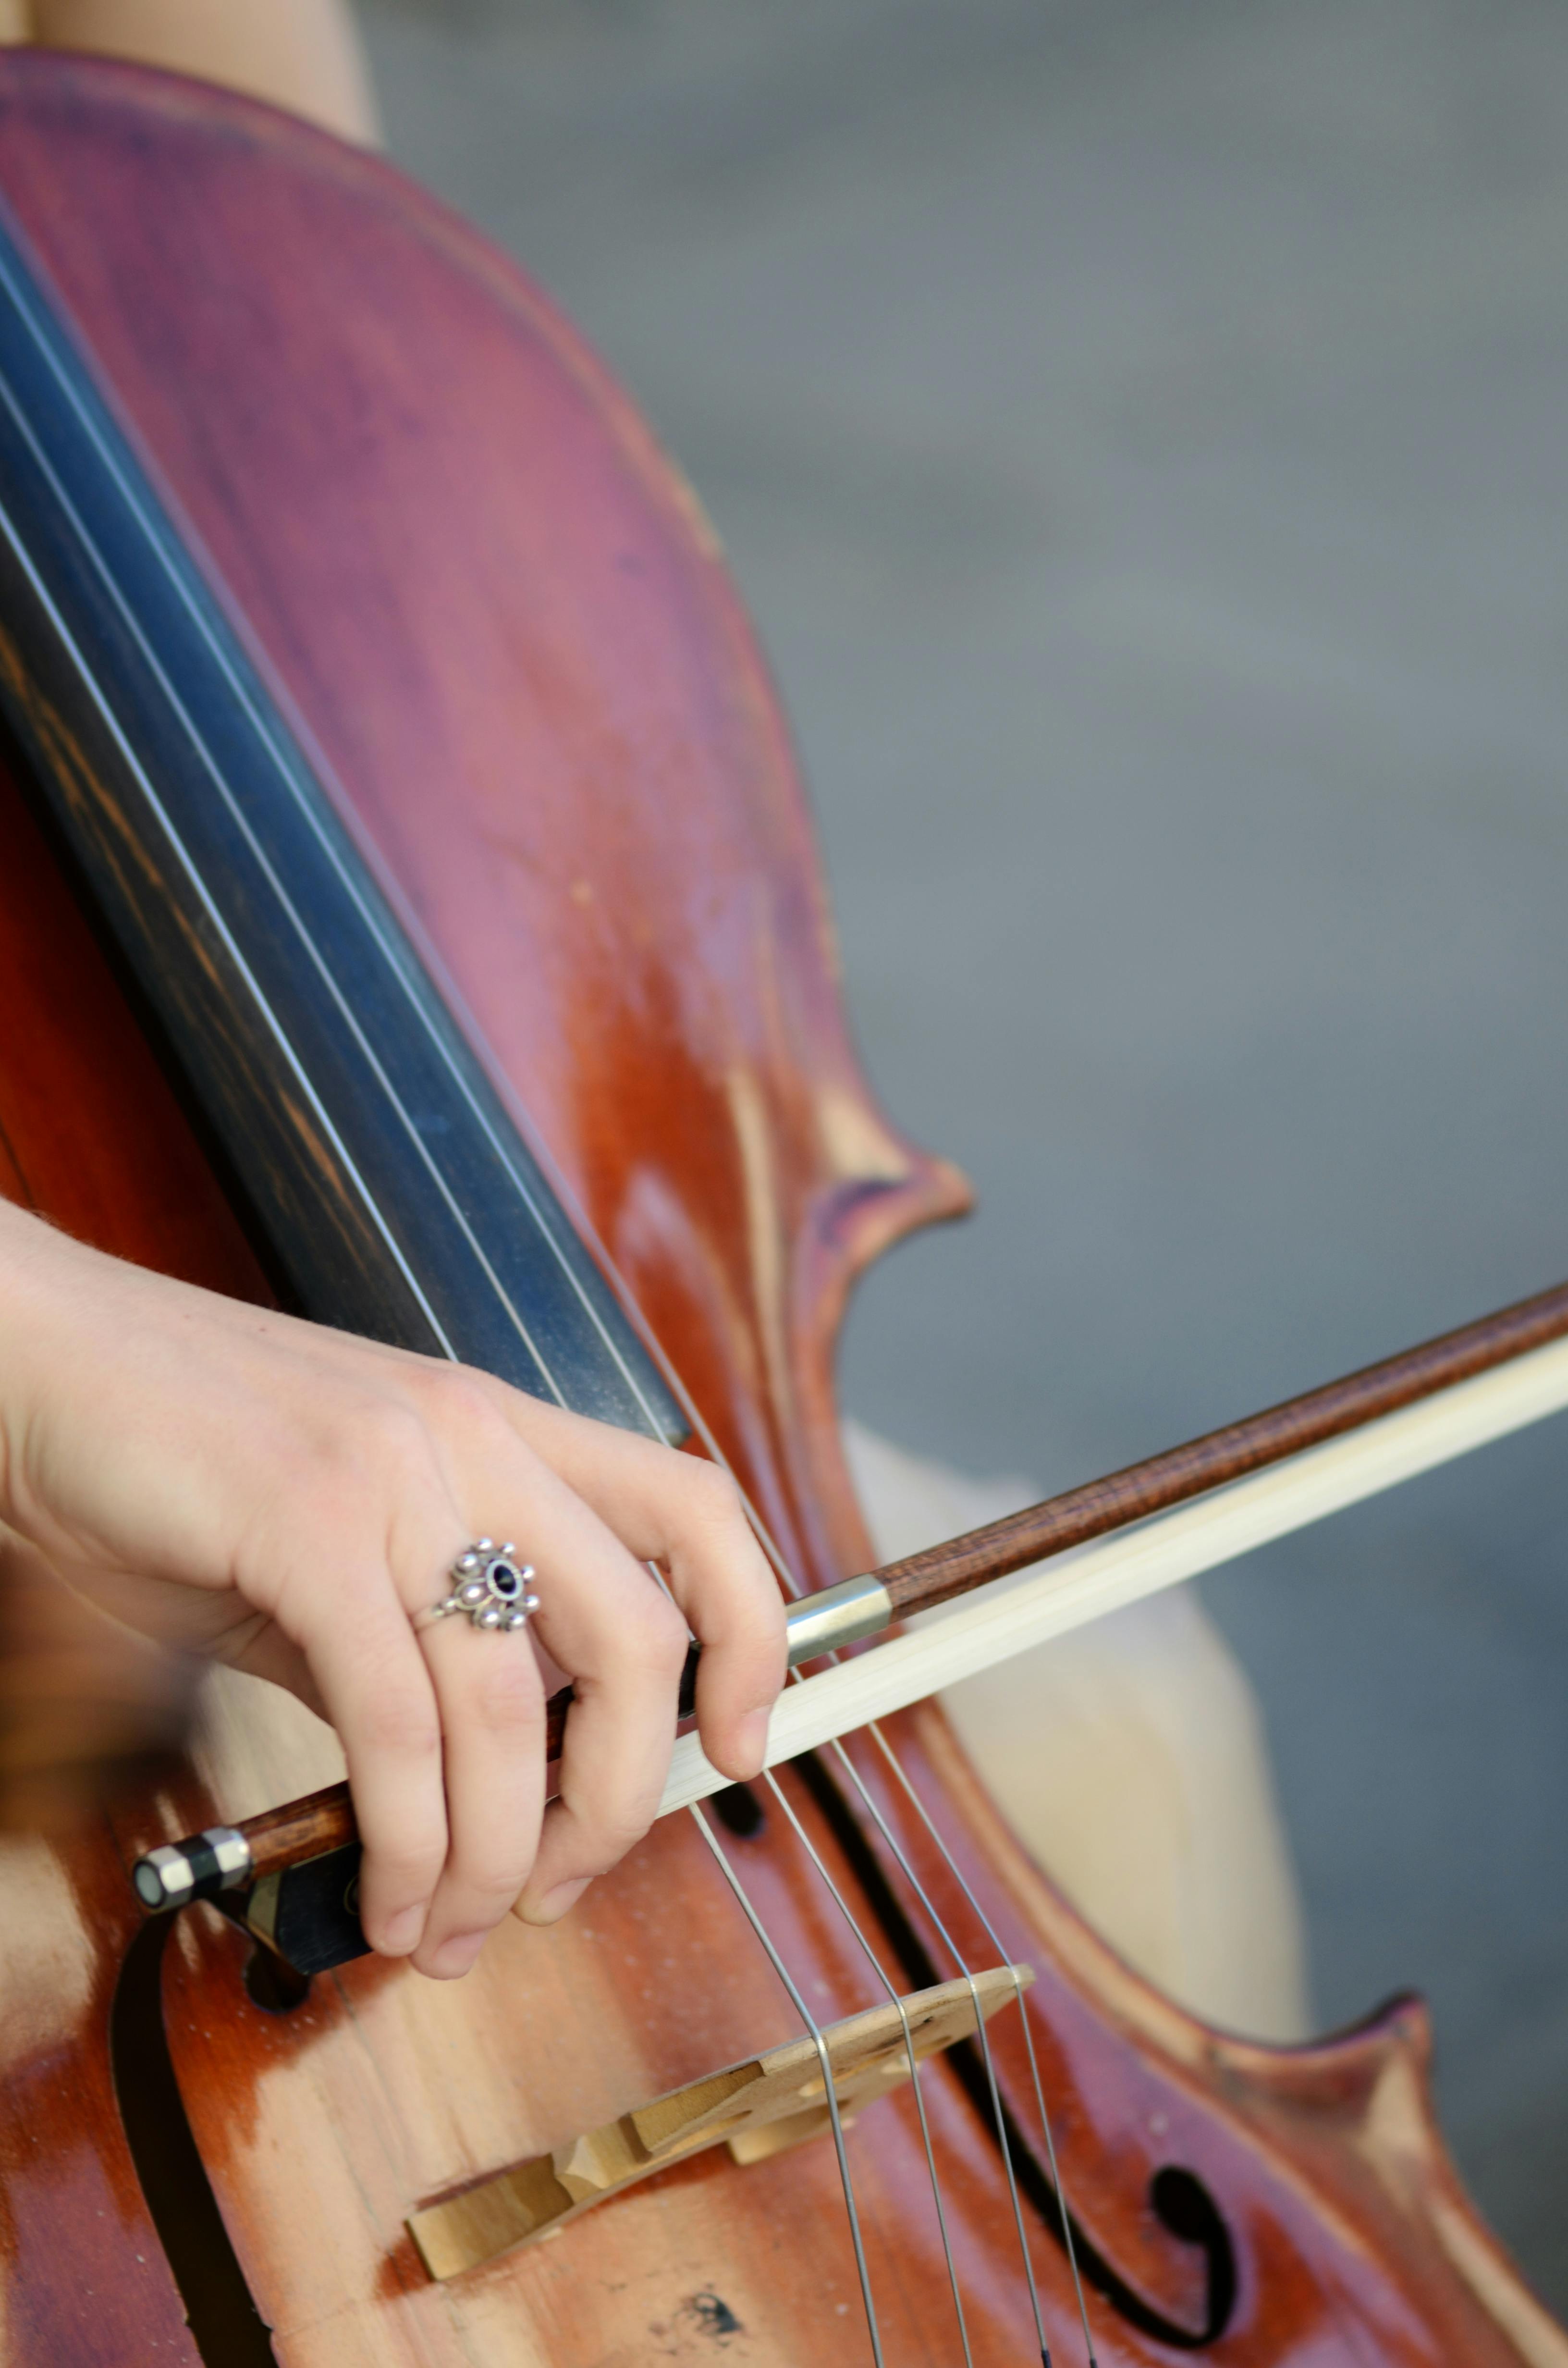 Free stock photo of cellist, cello, classical music